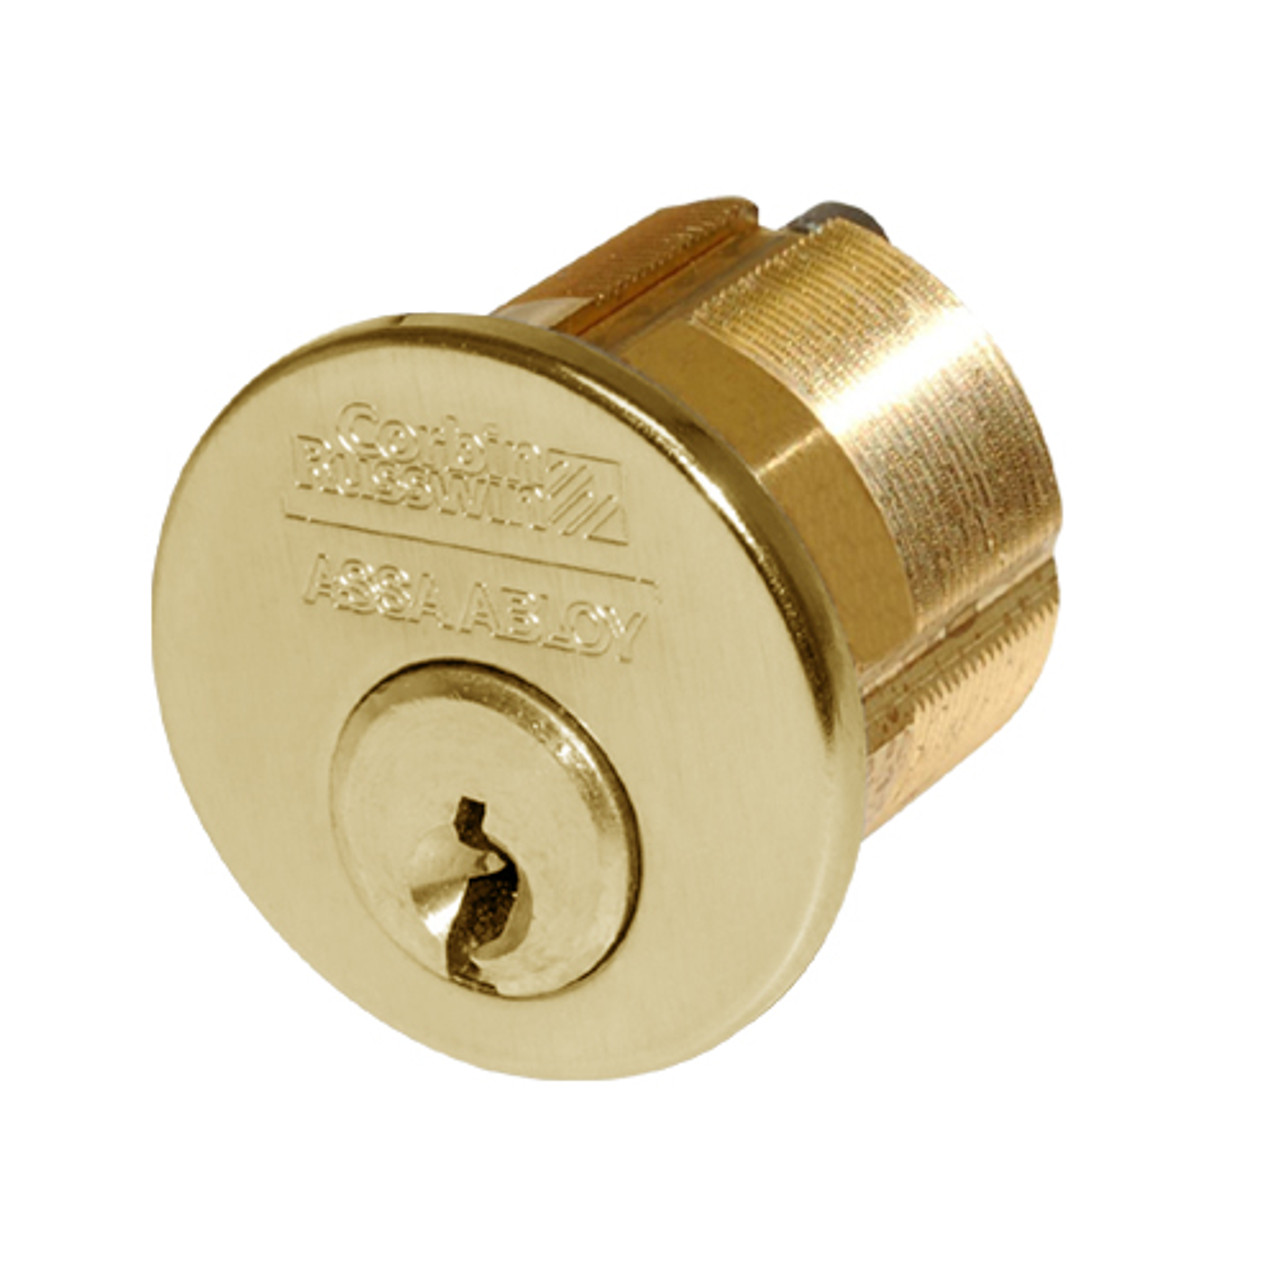 CR1000-114-A06-6-A1-605 Corbin Conventional Mortise Cylinder for Mortise Lock and DL3000 Deadlocks with Schlage L9000 Cam in Bright Brass Finish